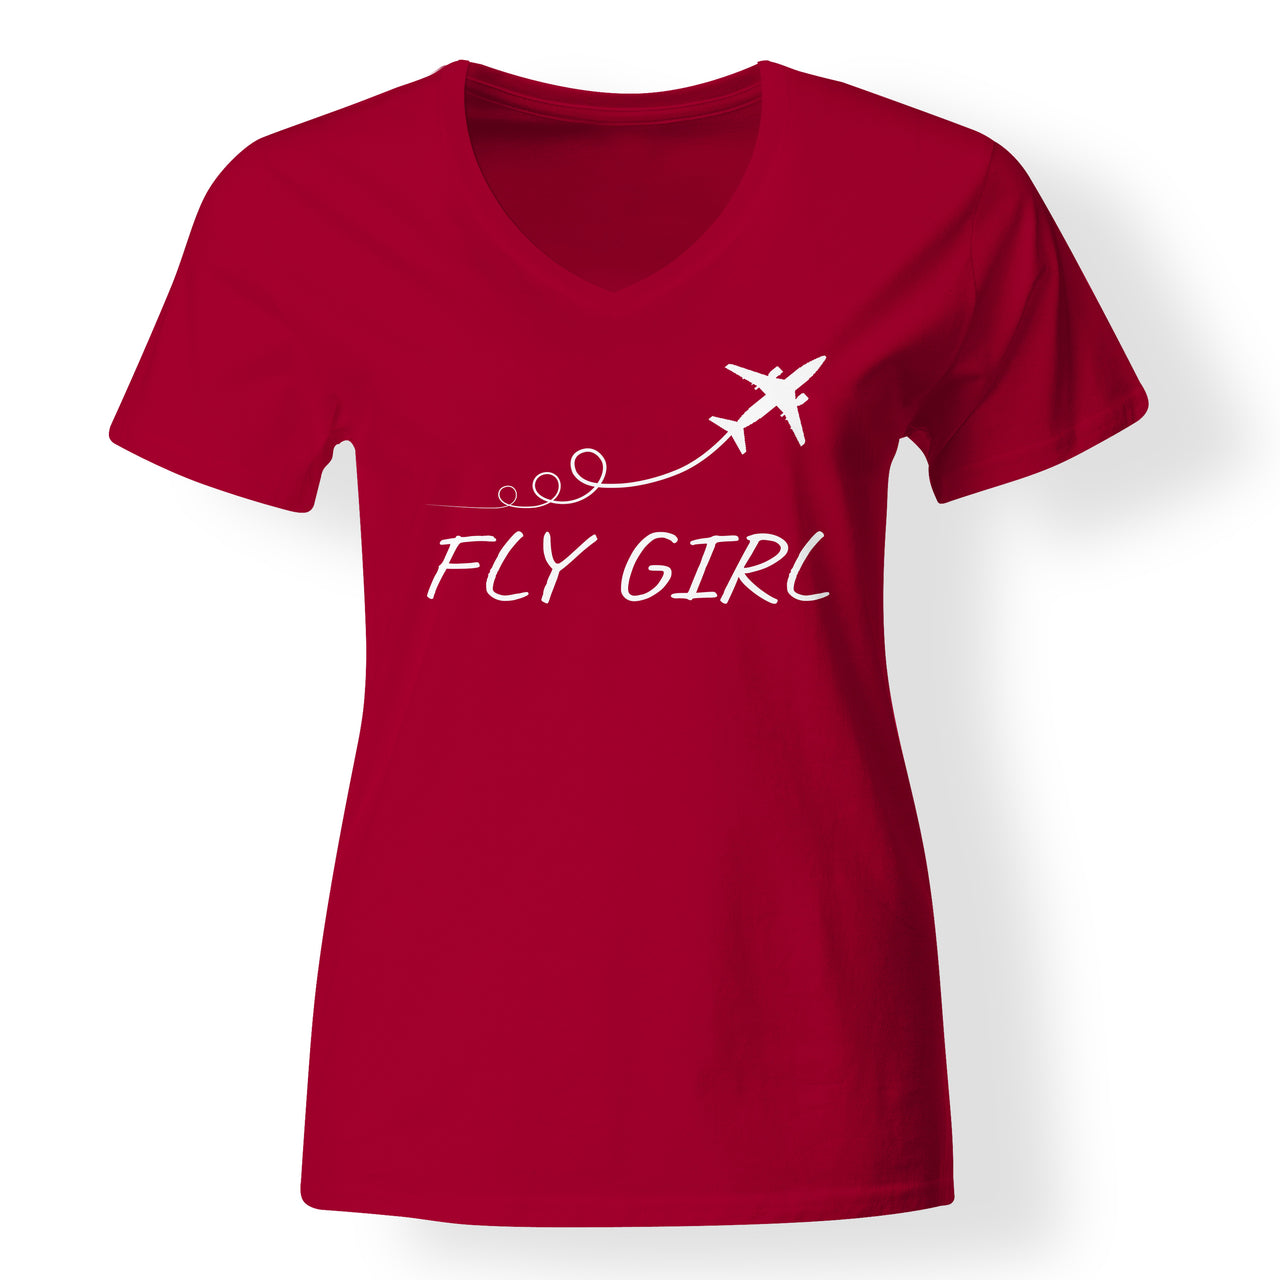 Just Fly It & Fly Girl Designed V-Neck T-Shirts